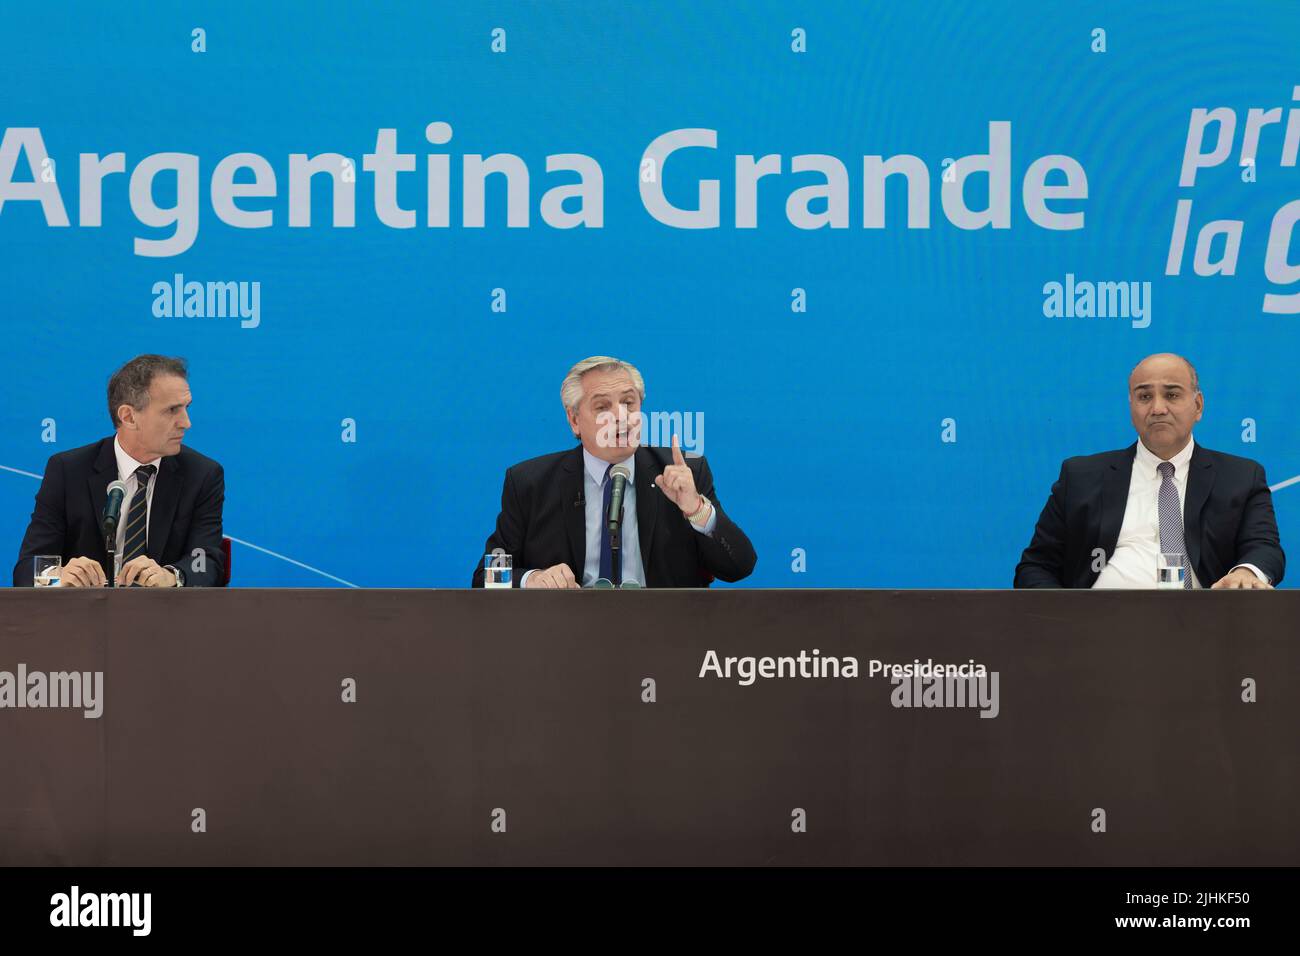 Buenos Aires, Argentina. 18th July, 2022. President Alberto Fernández led the presentation of Argentina Grande, Infrastructure Plan for the Development of the Nation, together with the Minister of Public Works, Gabriel Katopodis and the Chief of the Cabinet of Ministers Juan Manzur n Buenos Aires, Argentina on July 18, 2022. (Photo by Esteban Osorio/Pacific Press/Sipa USA) Credit: Sipa USA/Alamy Live News Stock Photo